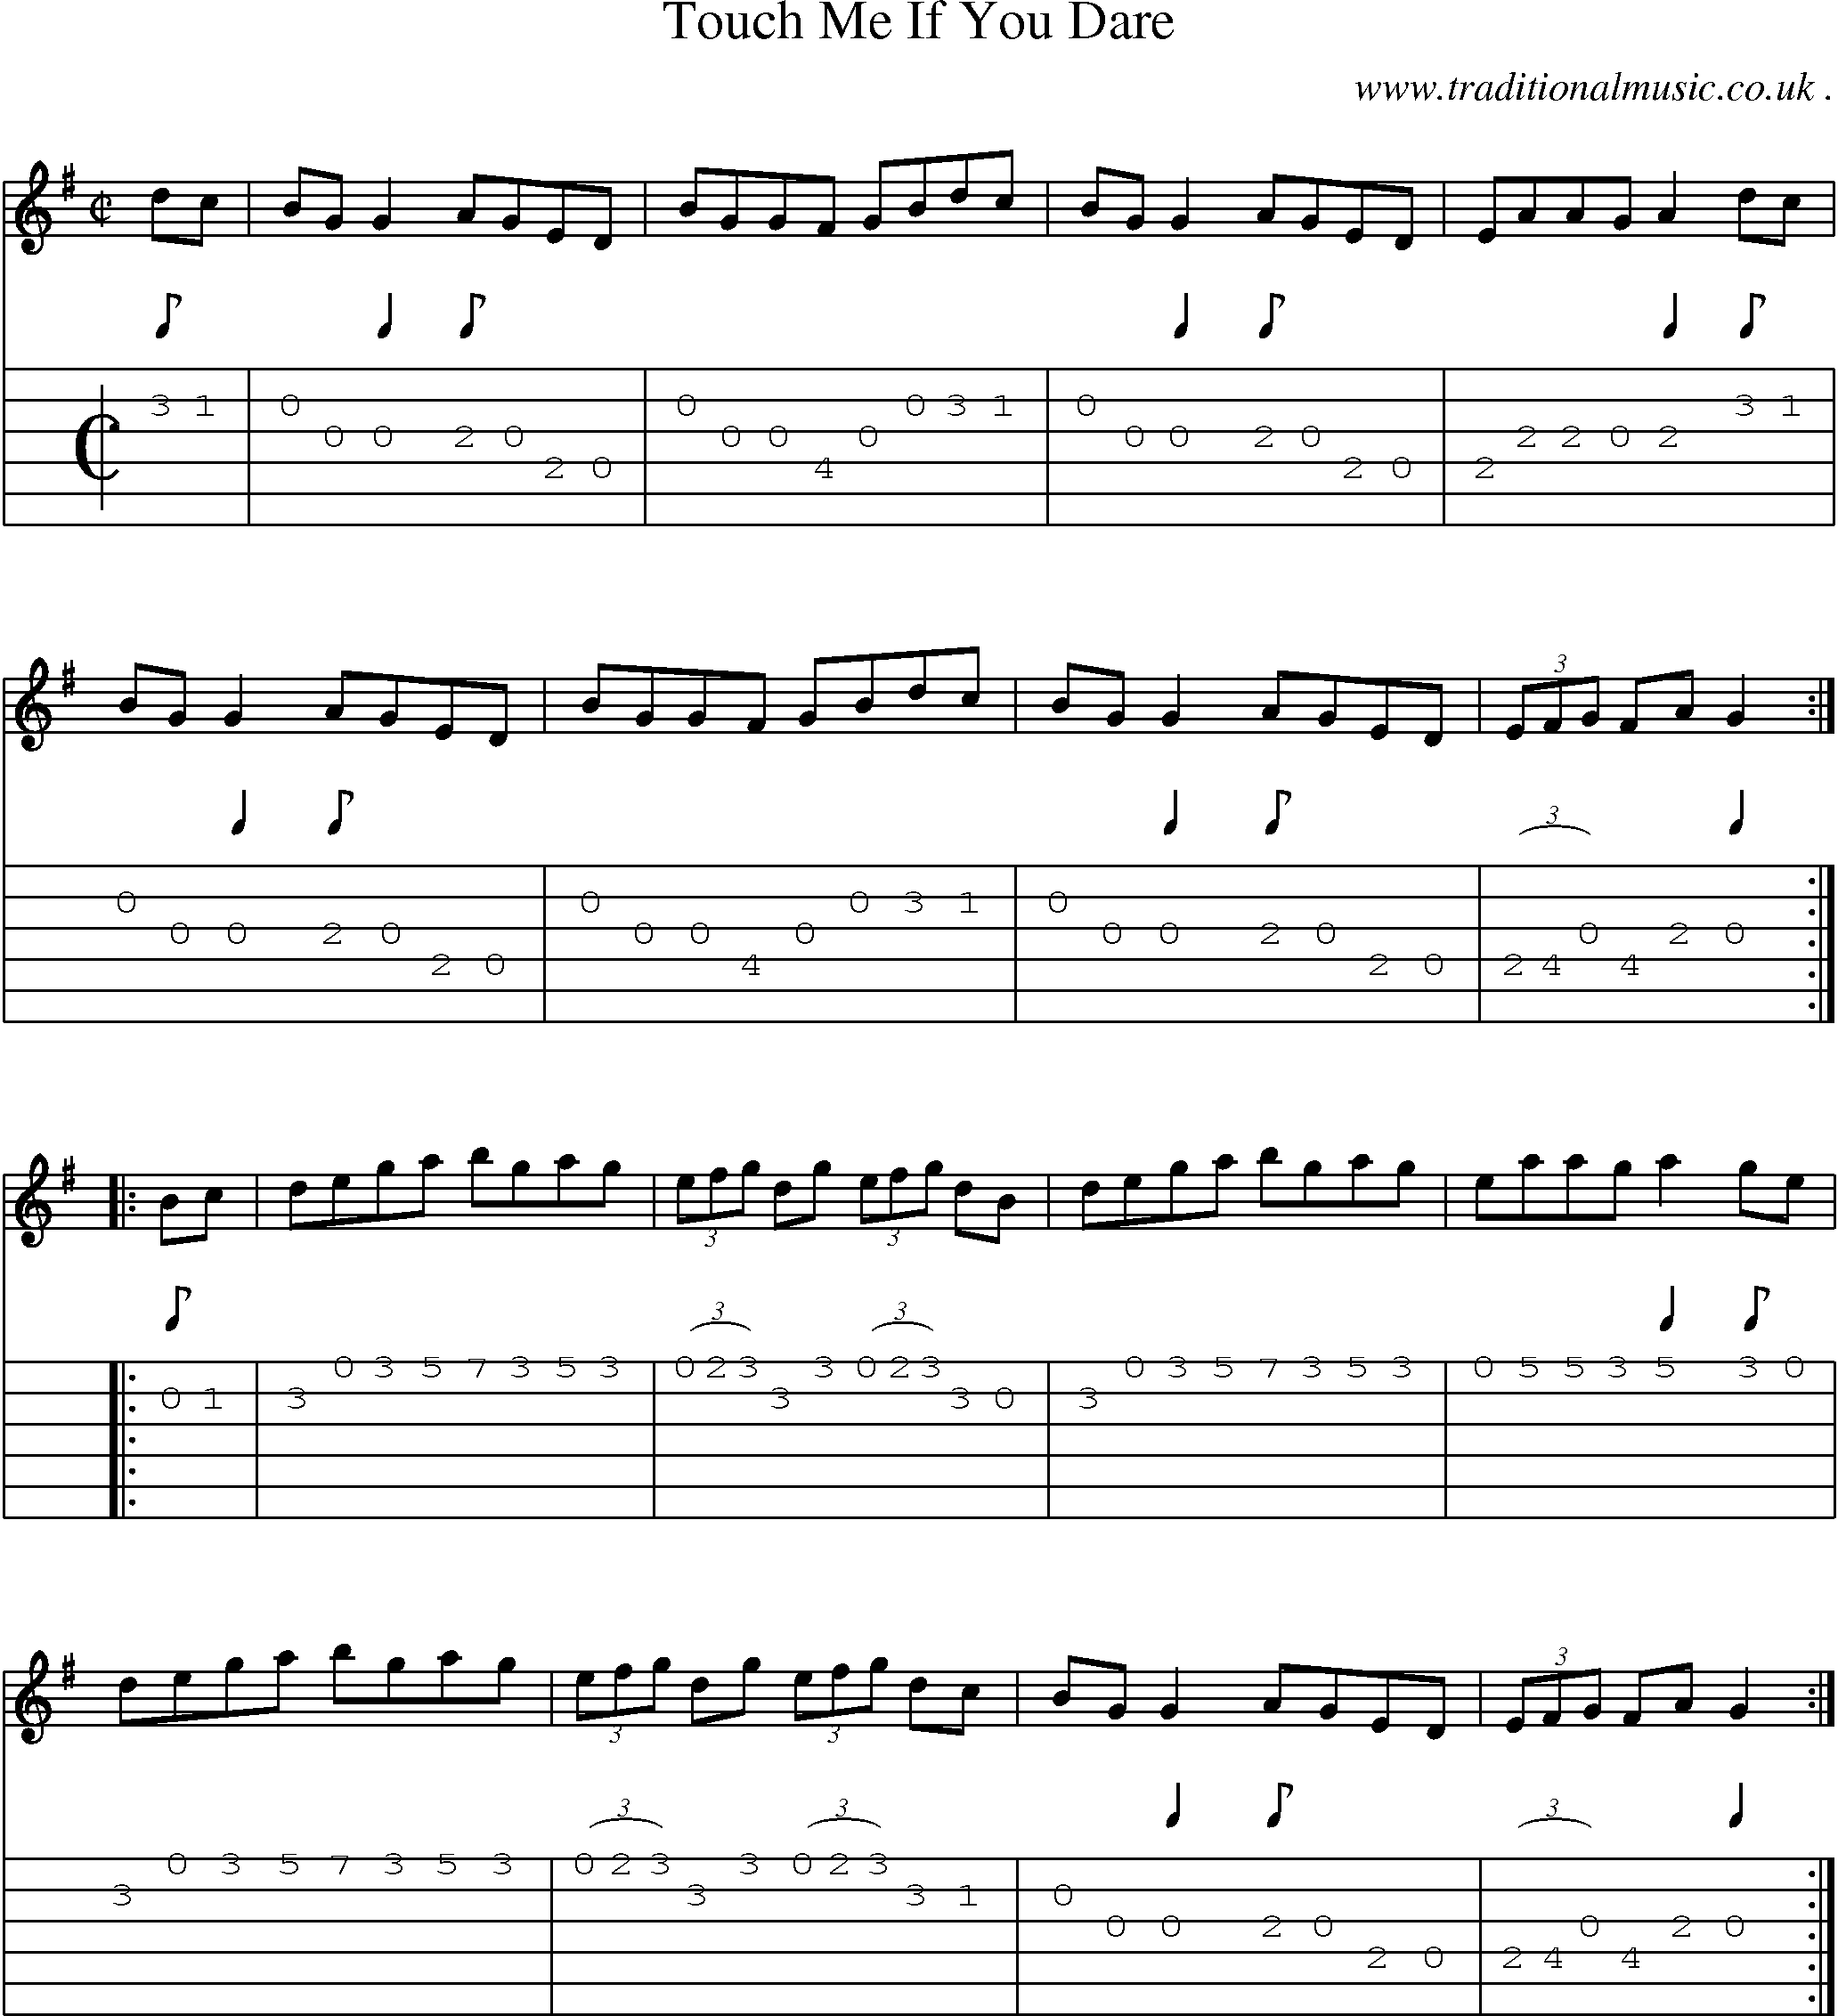 Sheet-Music and Guitar Tabs for Touch Me If You Dare